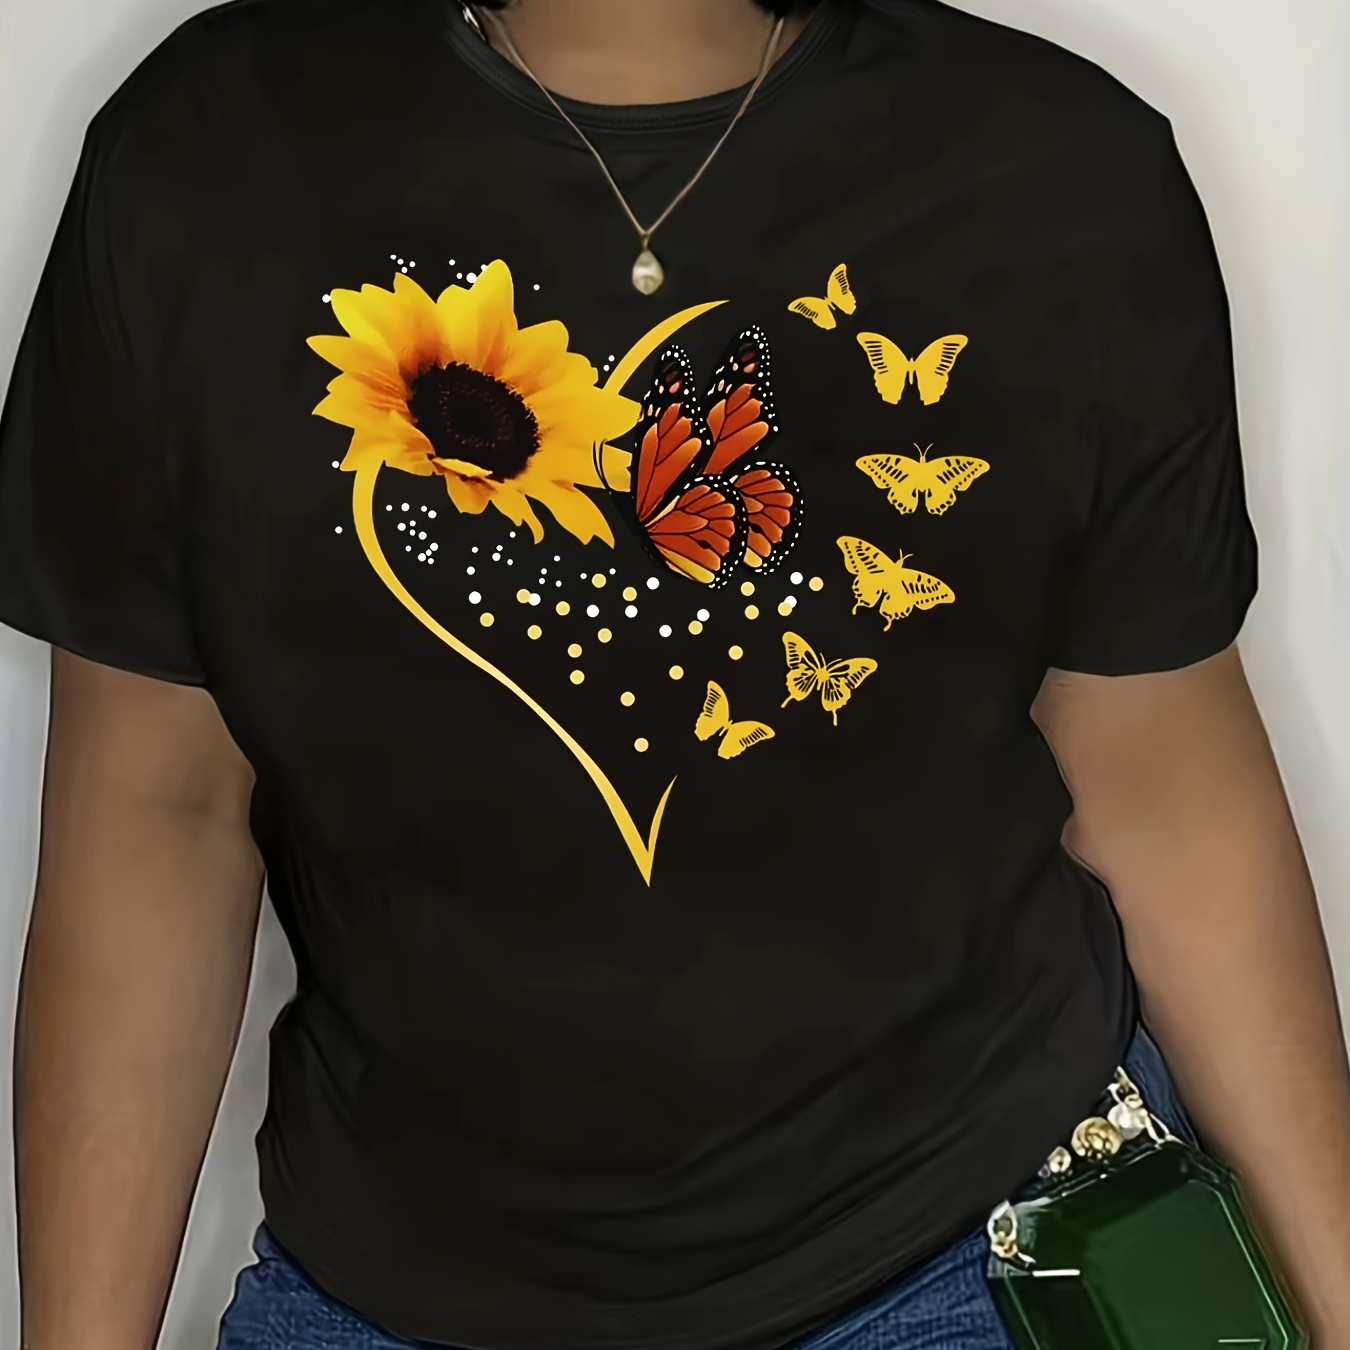 

Plus Size Flower & Butterfly Print T-shirt, Casual Short Sleeve Top For Spring & Summer, Women's Plus Size Clothing